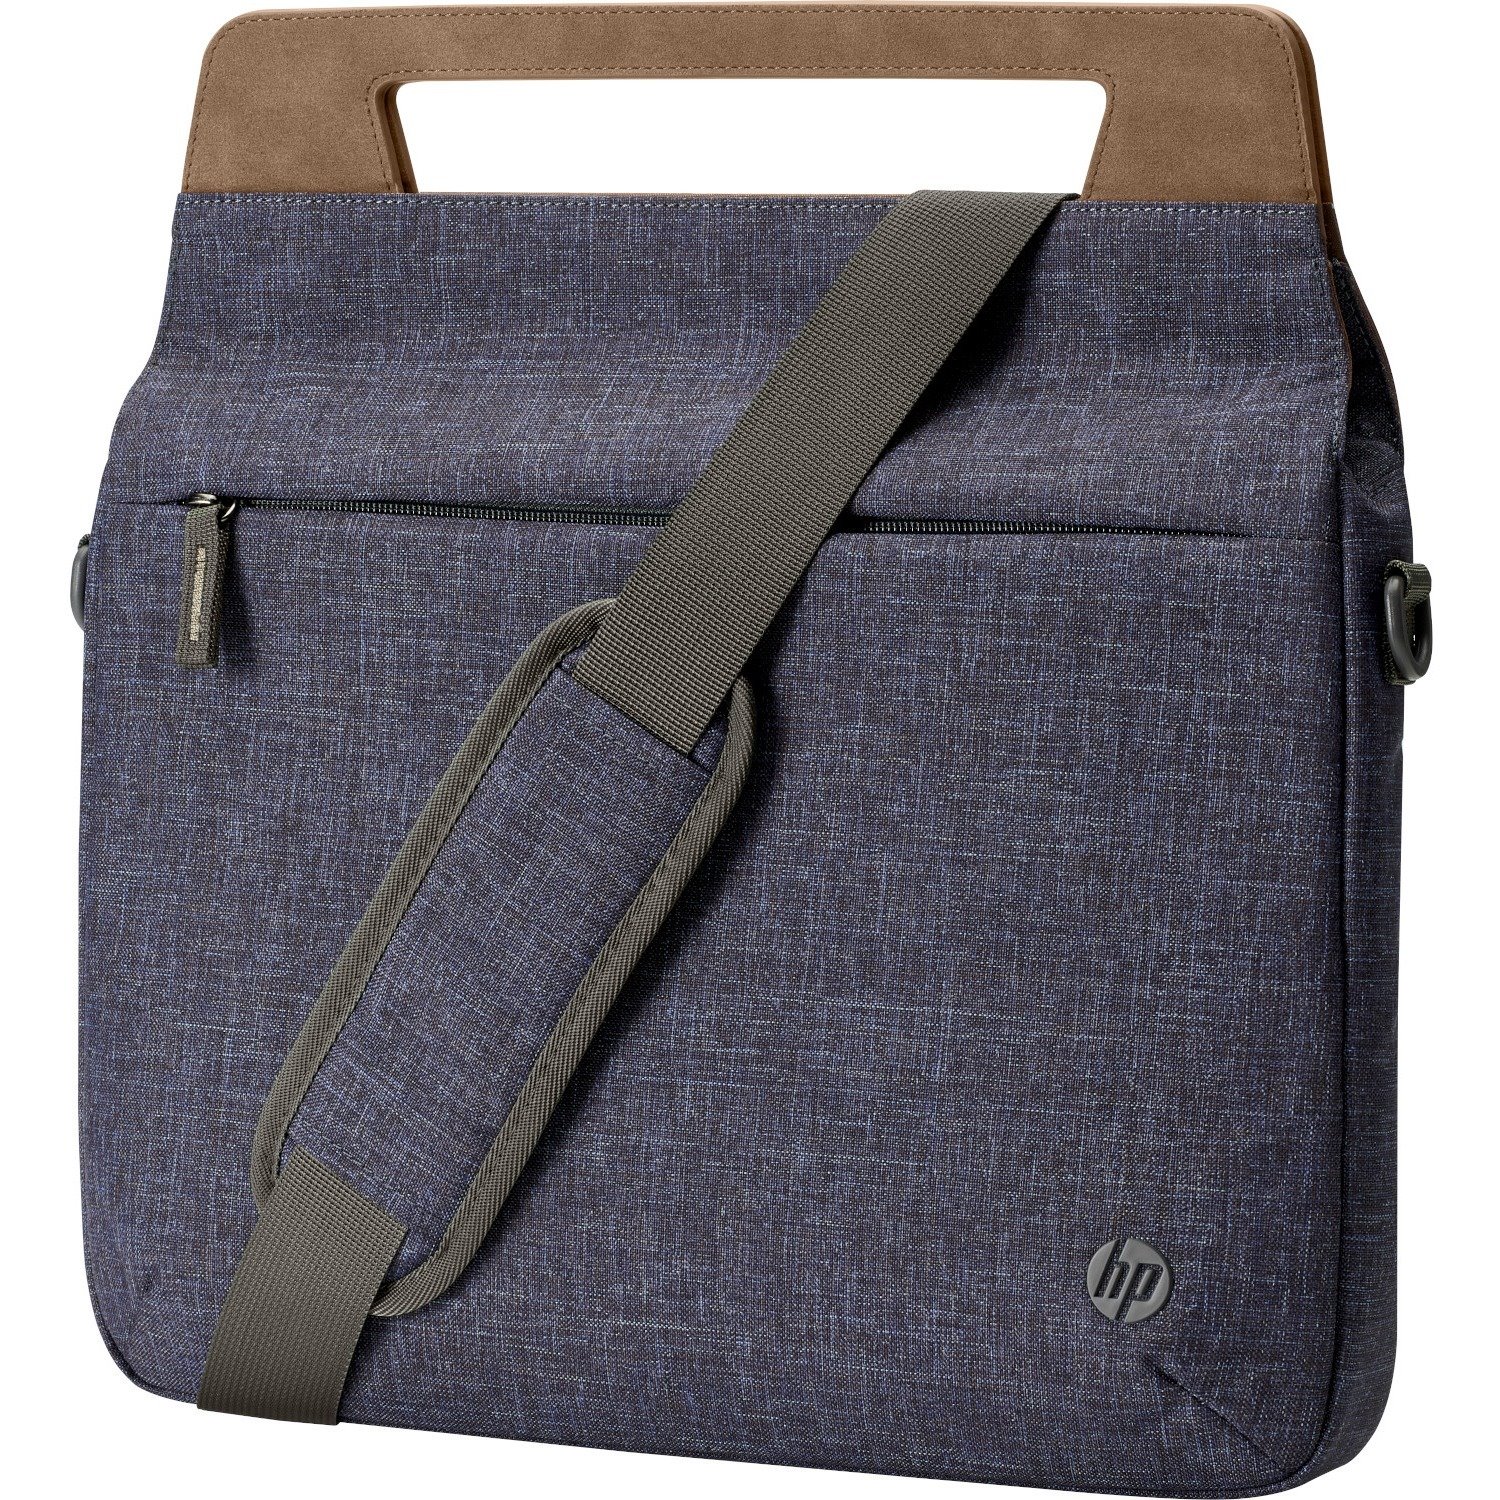 HP Renew Carrying Case (Briefcase) for 33 cm (13") to 35.6 cm (14") Notebook - Blue